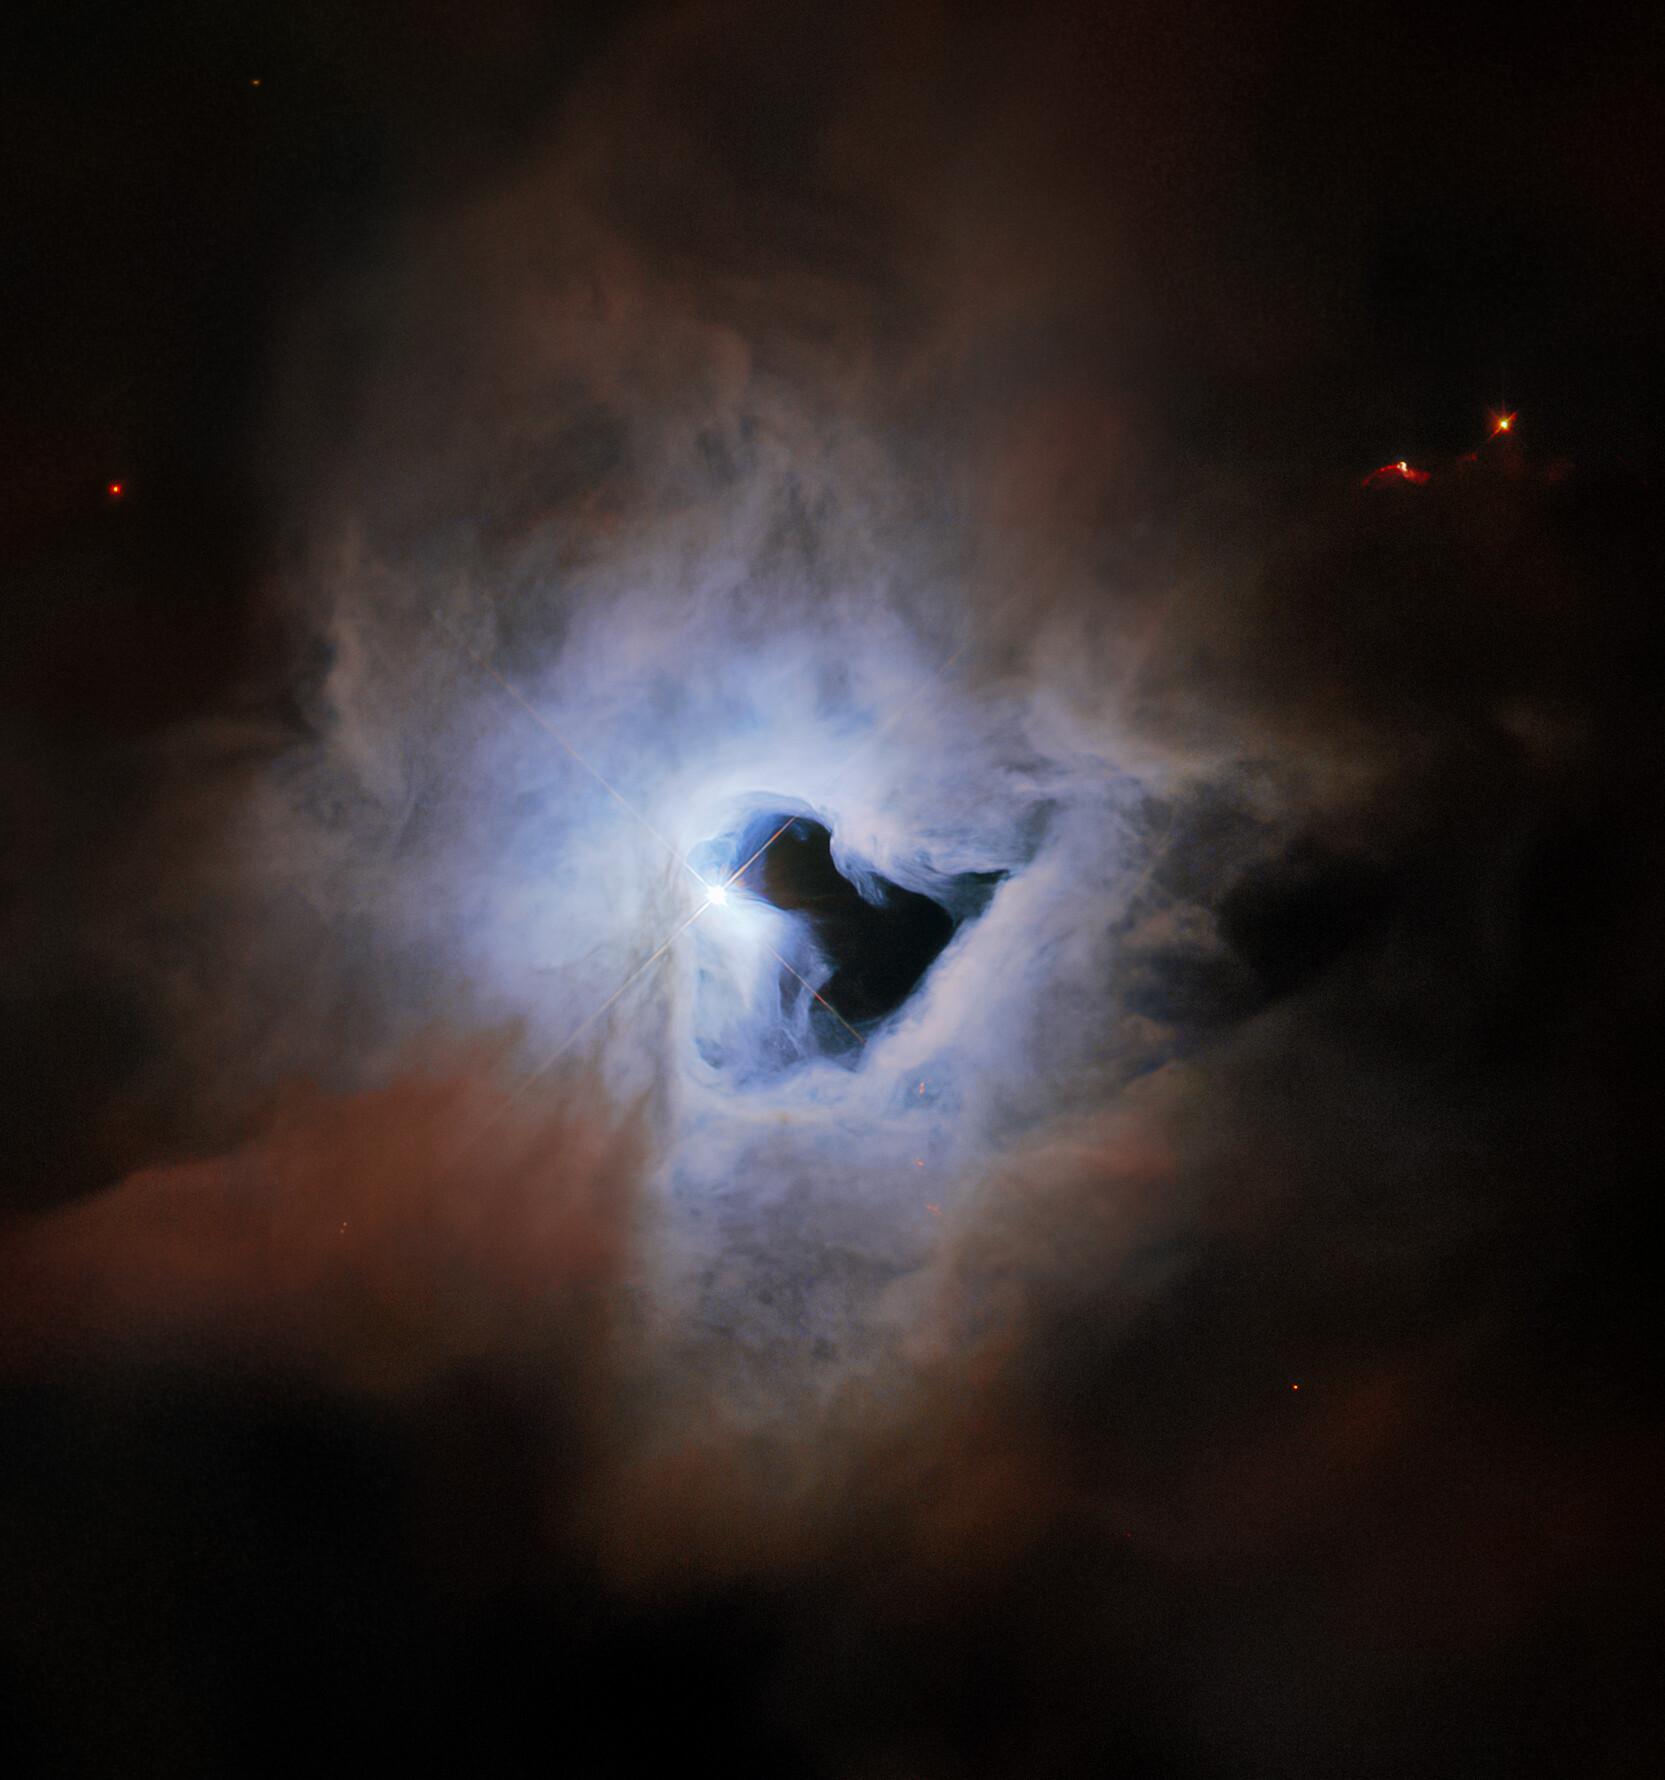 This peculiar portrait from the NASA/ESA Hubble Space Telescope showcases NGC 1999, a reflection nebula in the constellation Orion.